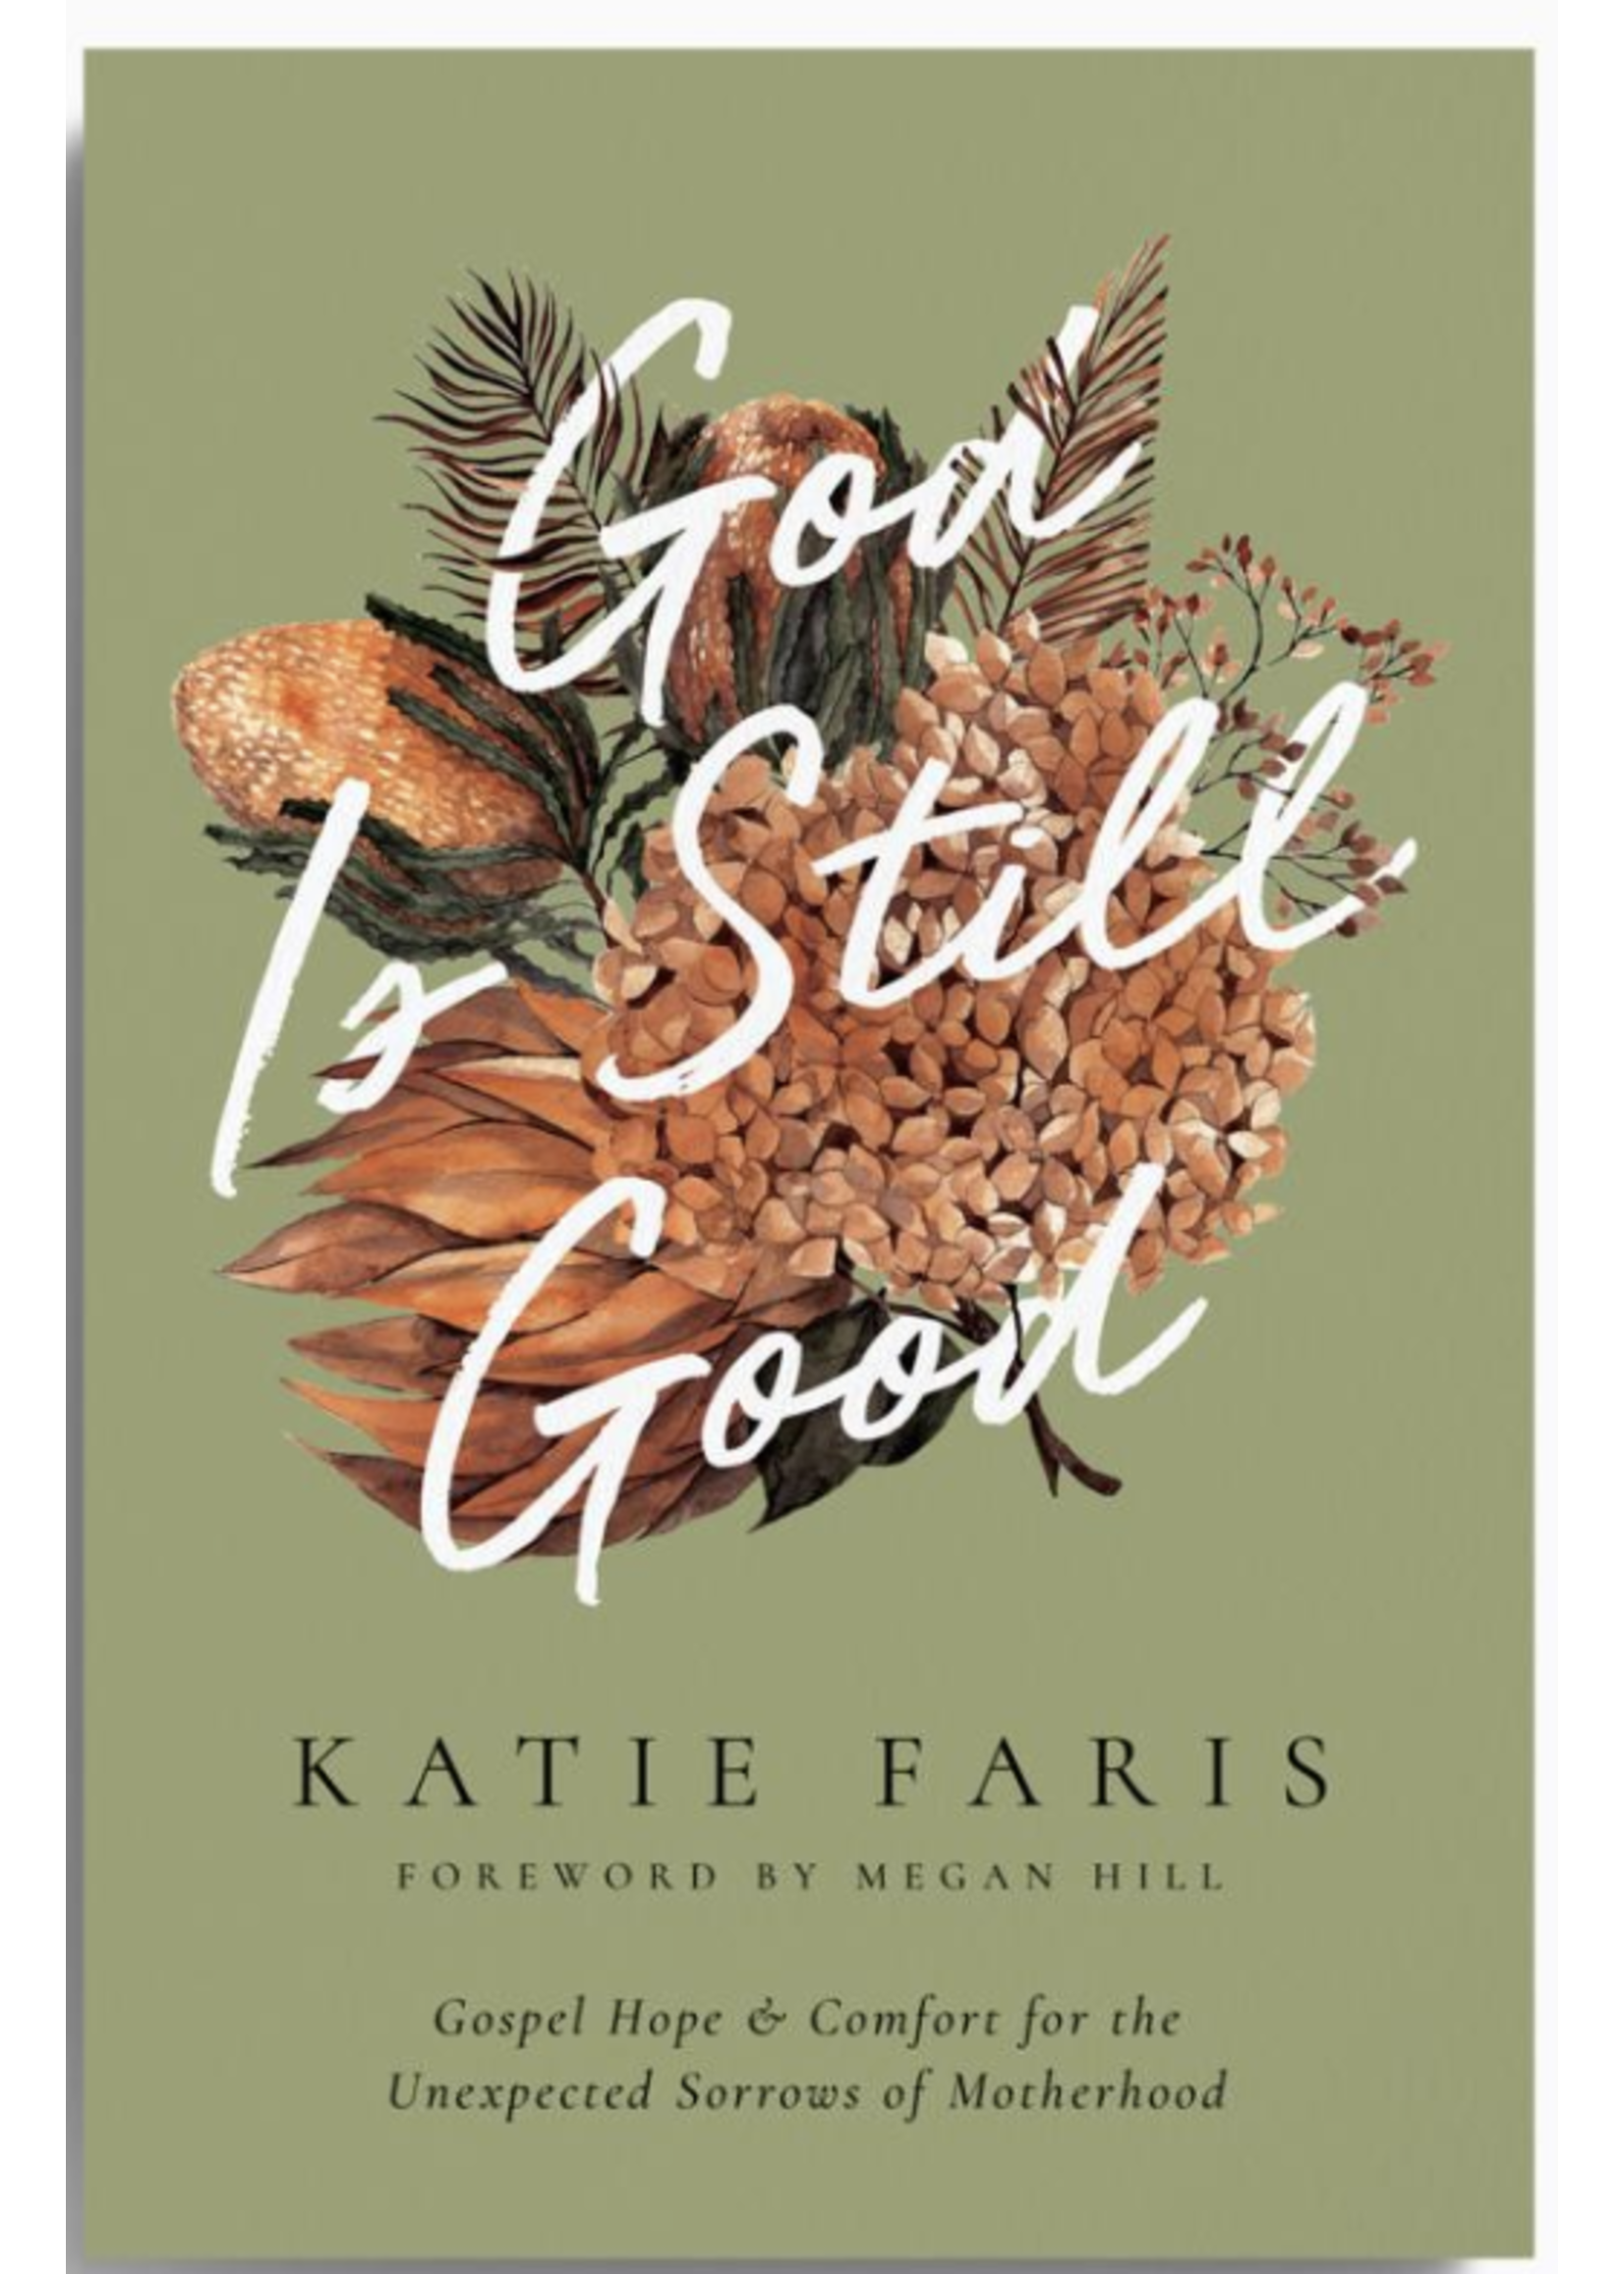 God Is Still Good: Gospel Hope and Comfort for the Unexpected Sorrows of Motherhood [Katie Faris]